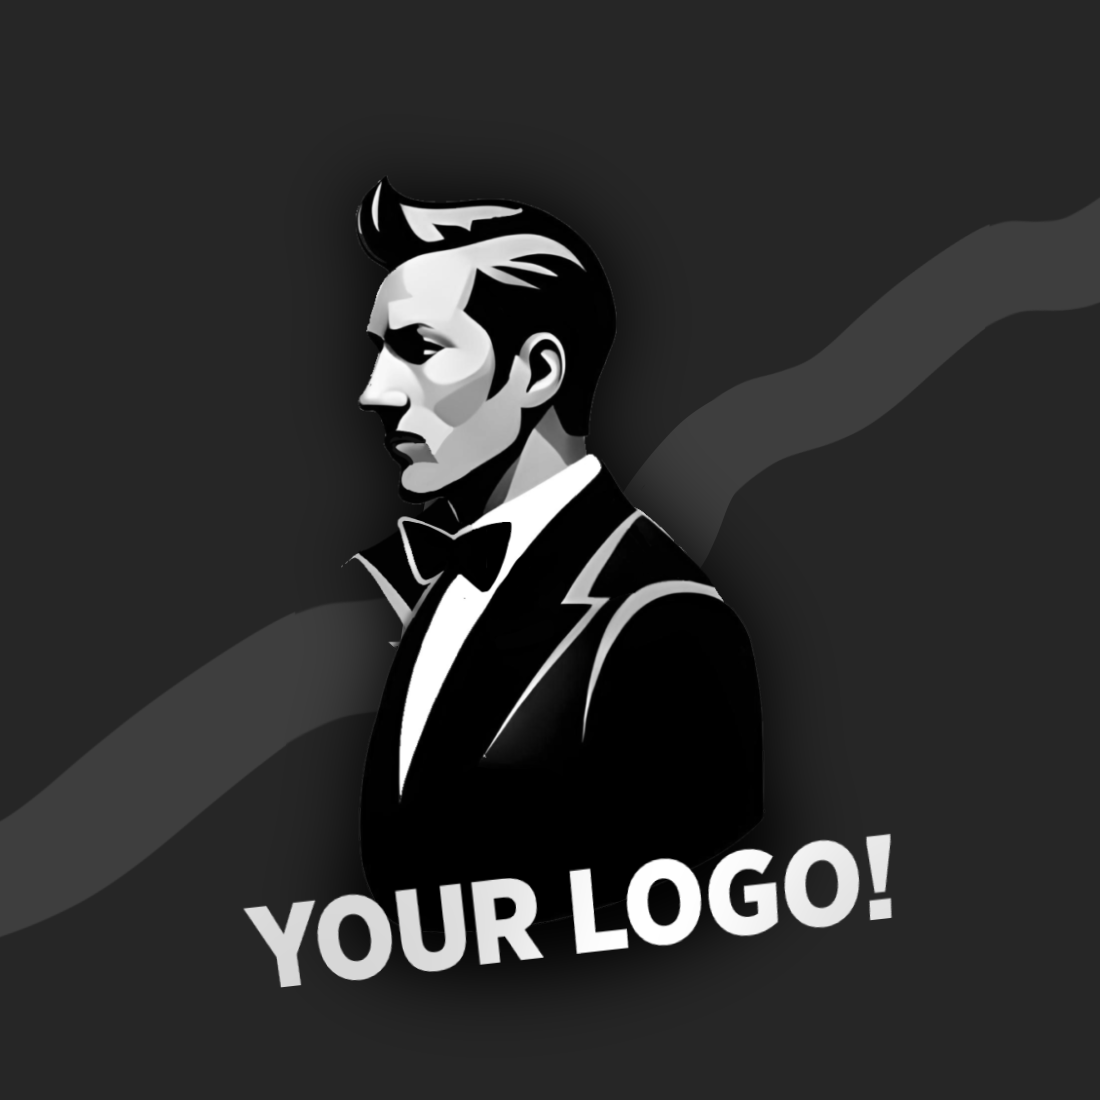 Your logo cover image.